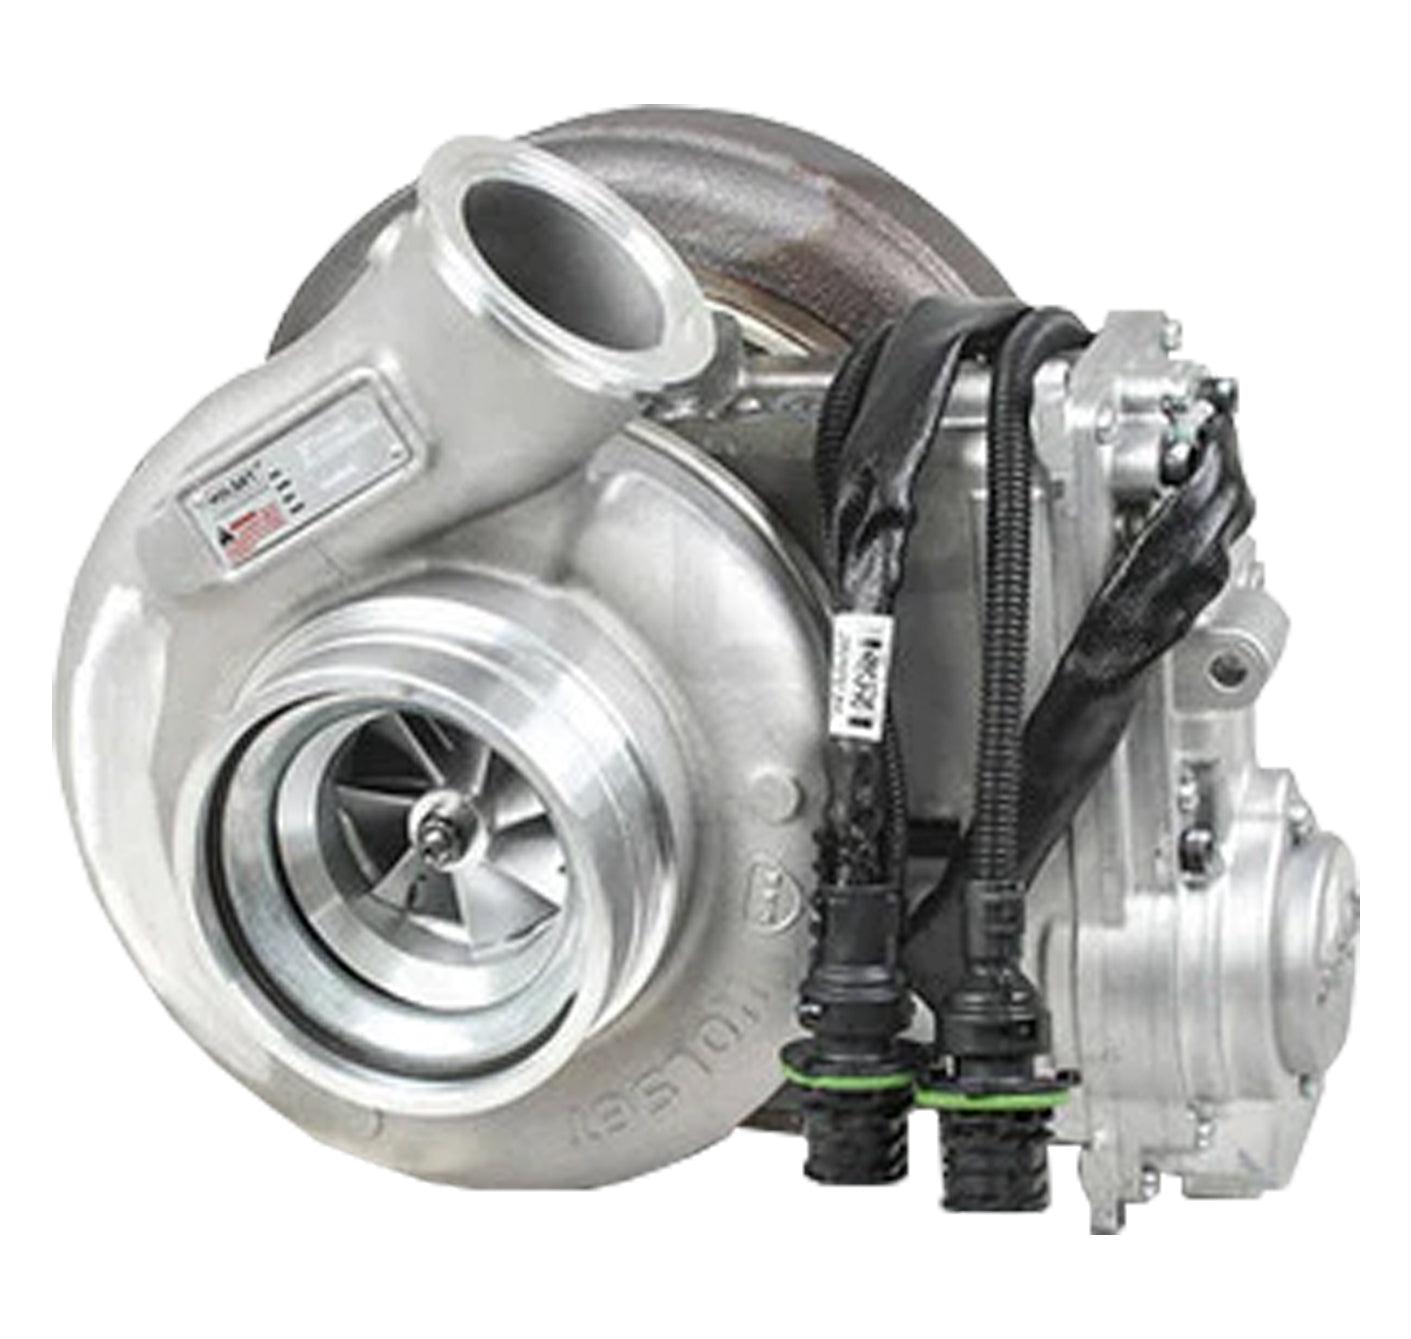 21647087 Genuine Volvo® Holset® Turbocharger With Actuator For Md11 - ADVANCED TRUCK PARTS